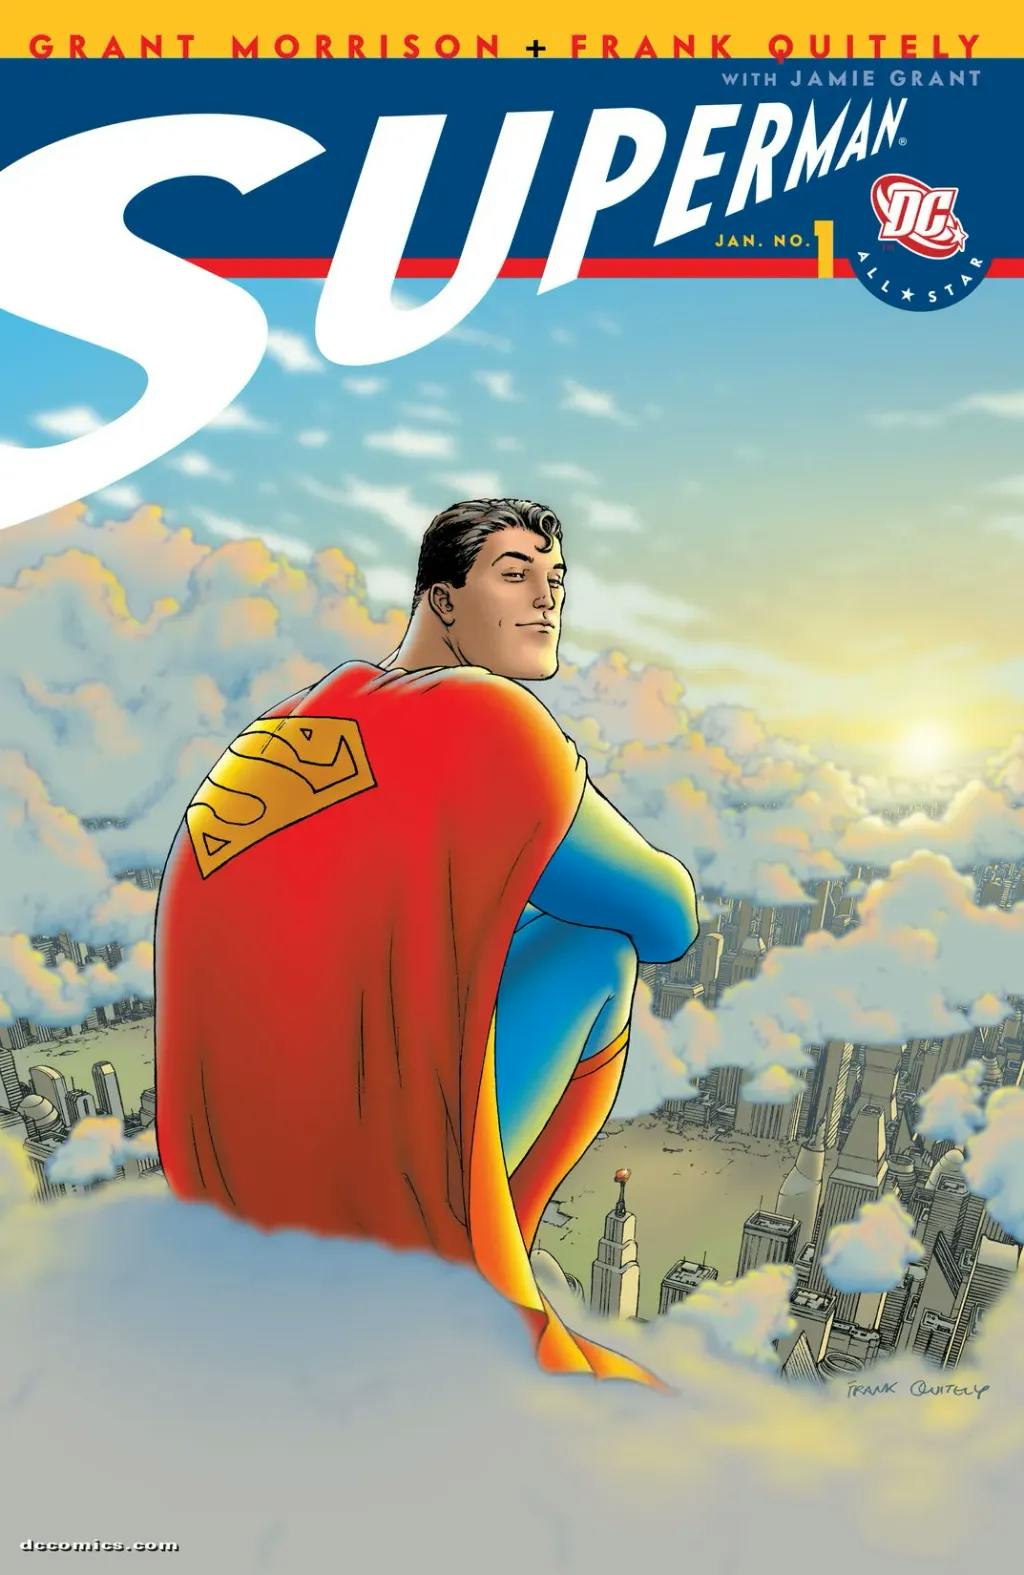 Cover of All-Star Superman #1 by Grant Morrison and Frank Quitely